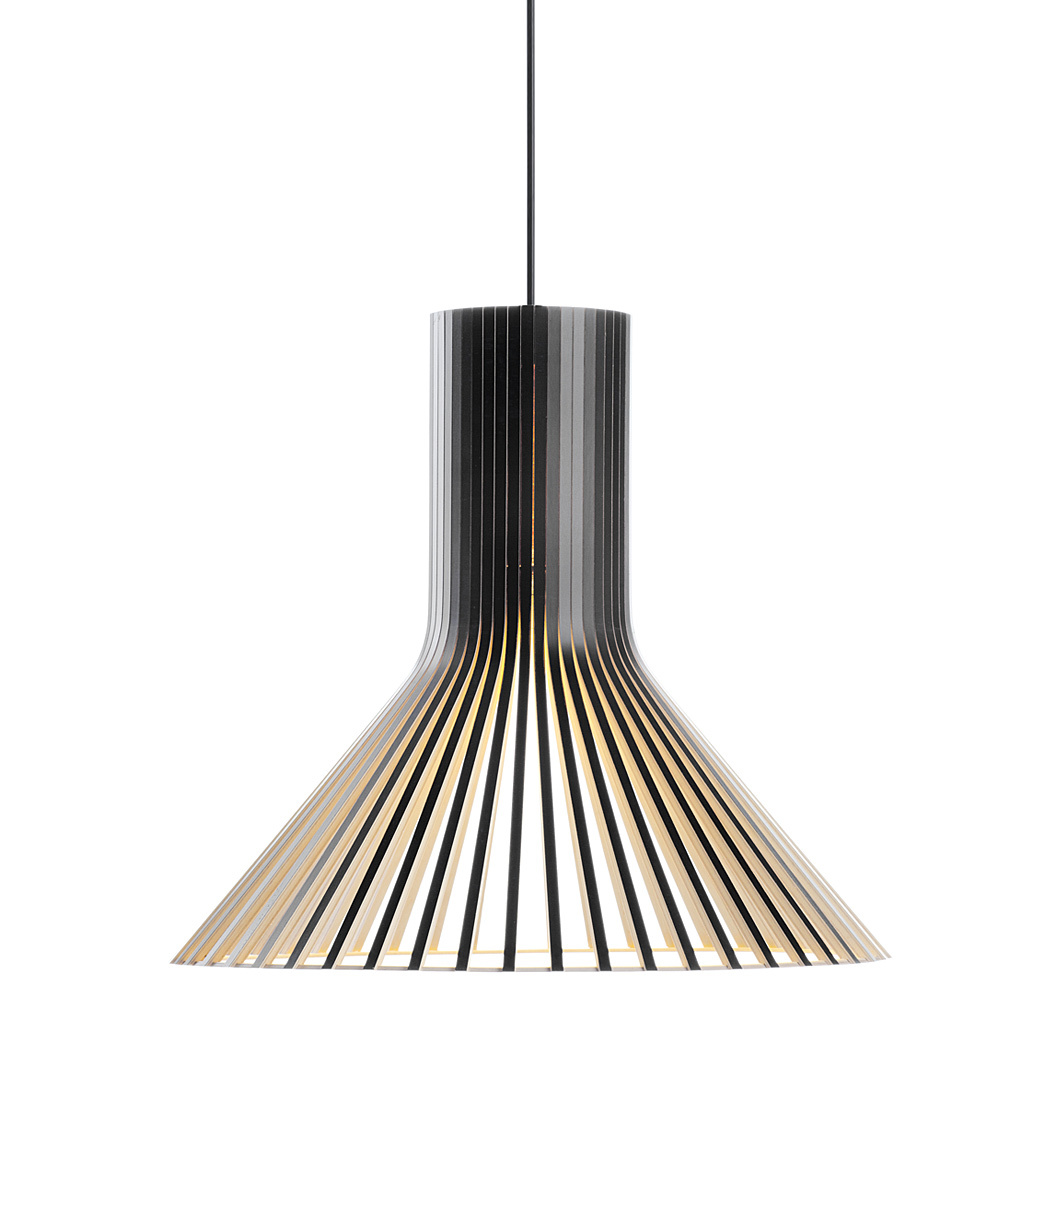 Puncto 4203 pendant lamp is available in black laminated